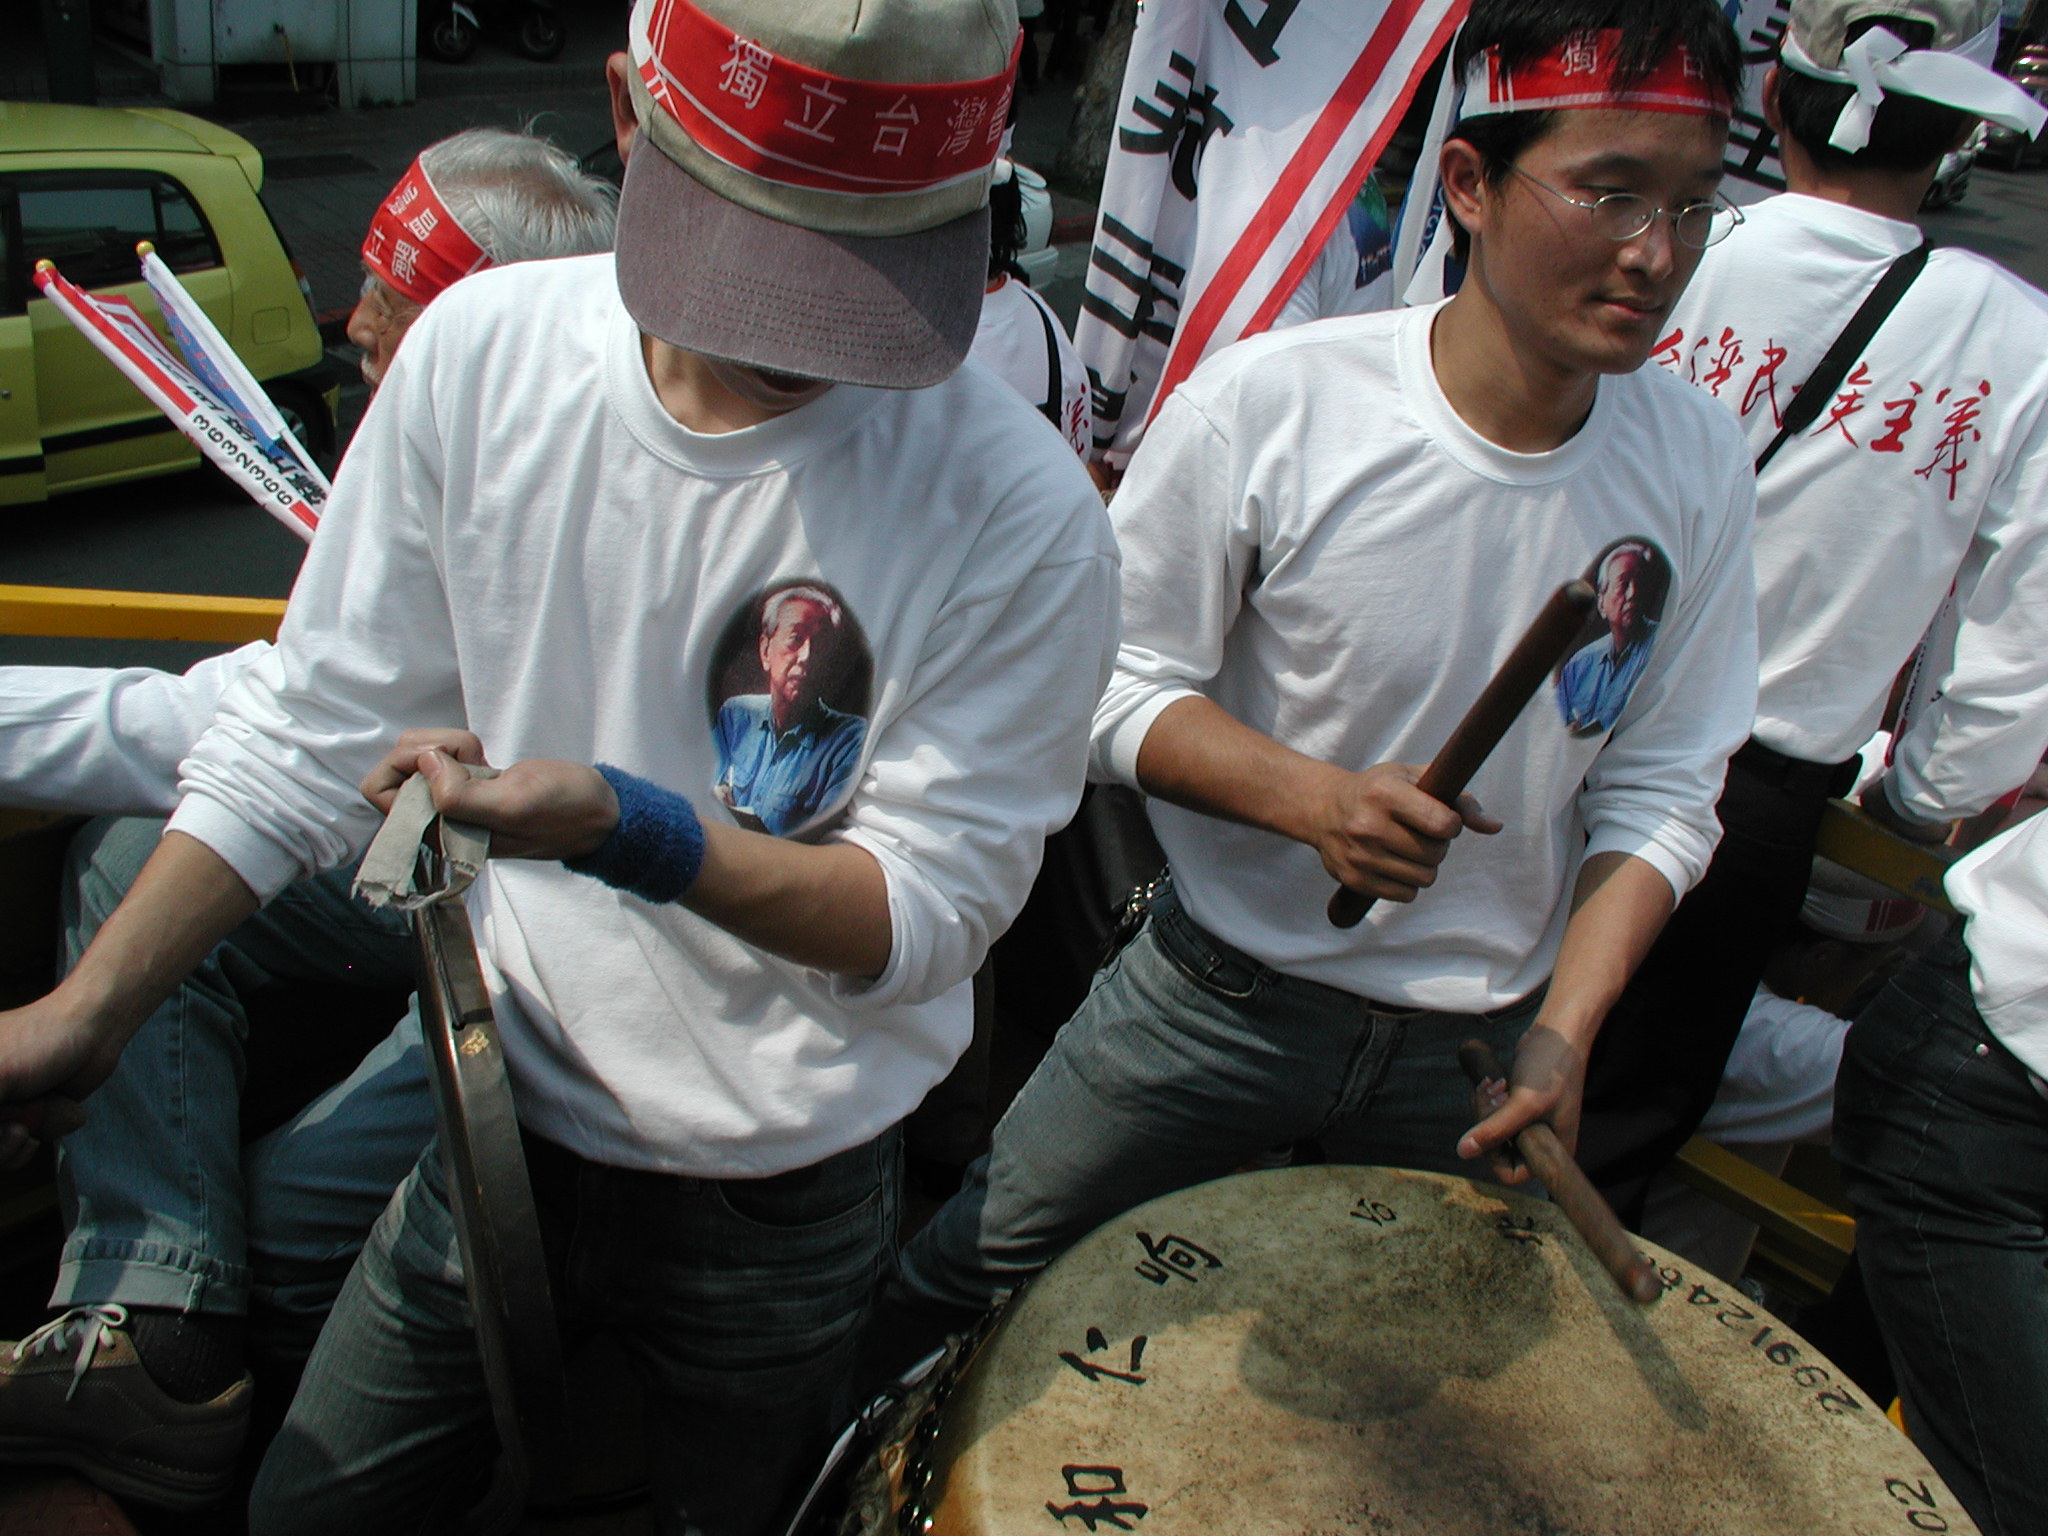 April 3, 2005- 10 Year Anniversary of the Taiwan Independence Action Motorcade